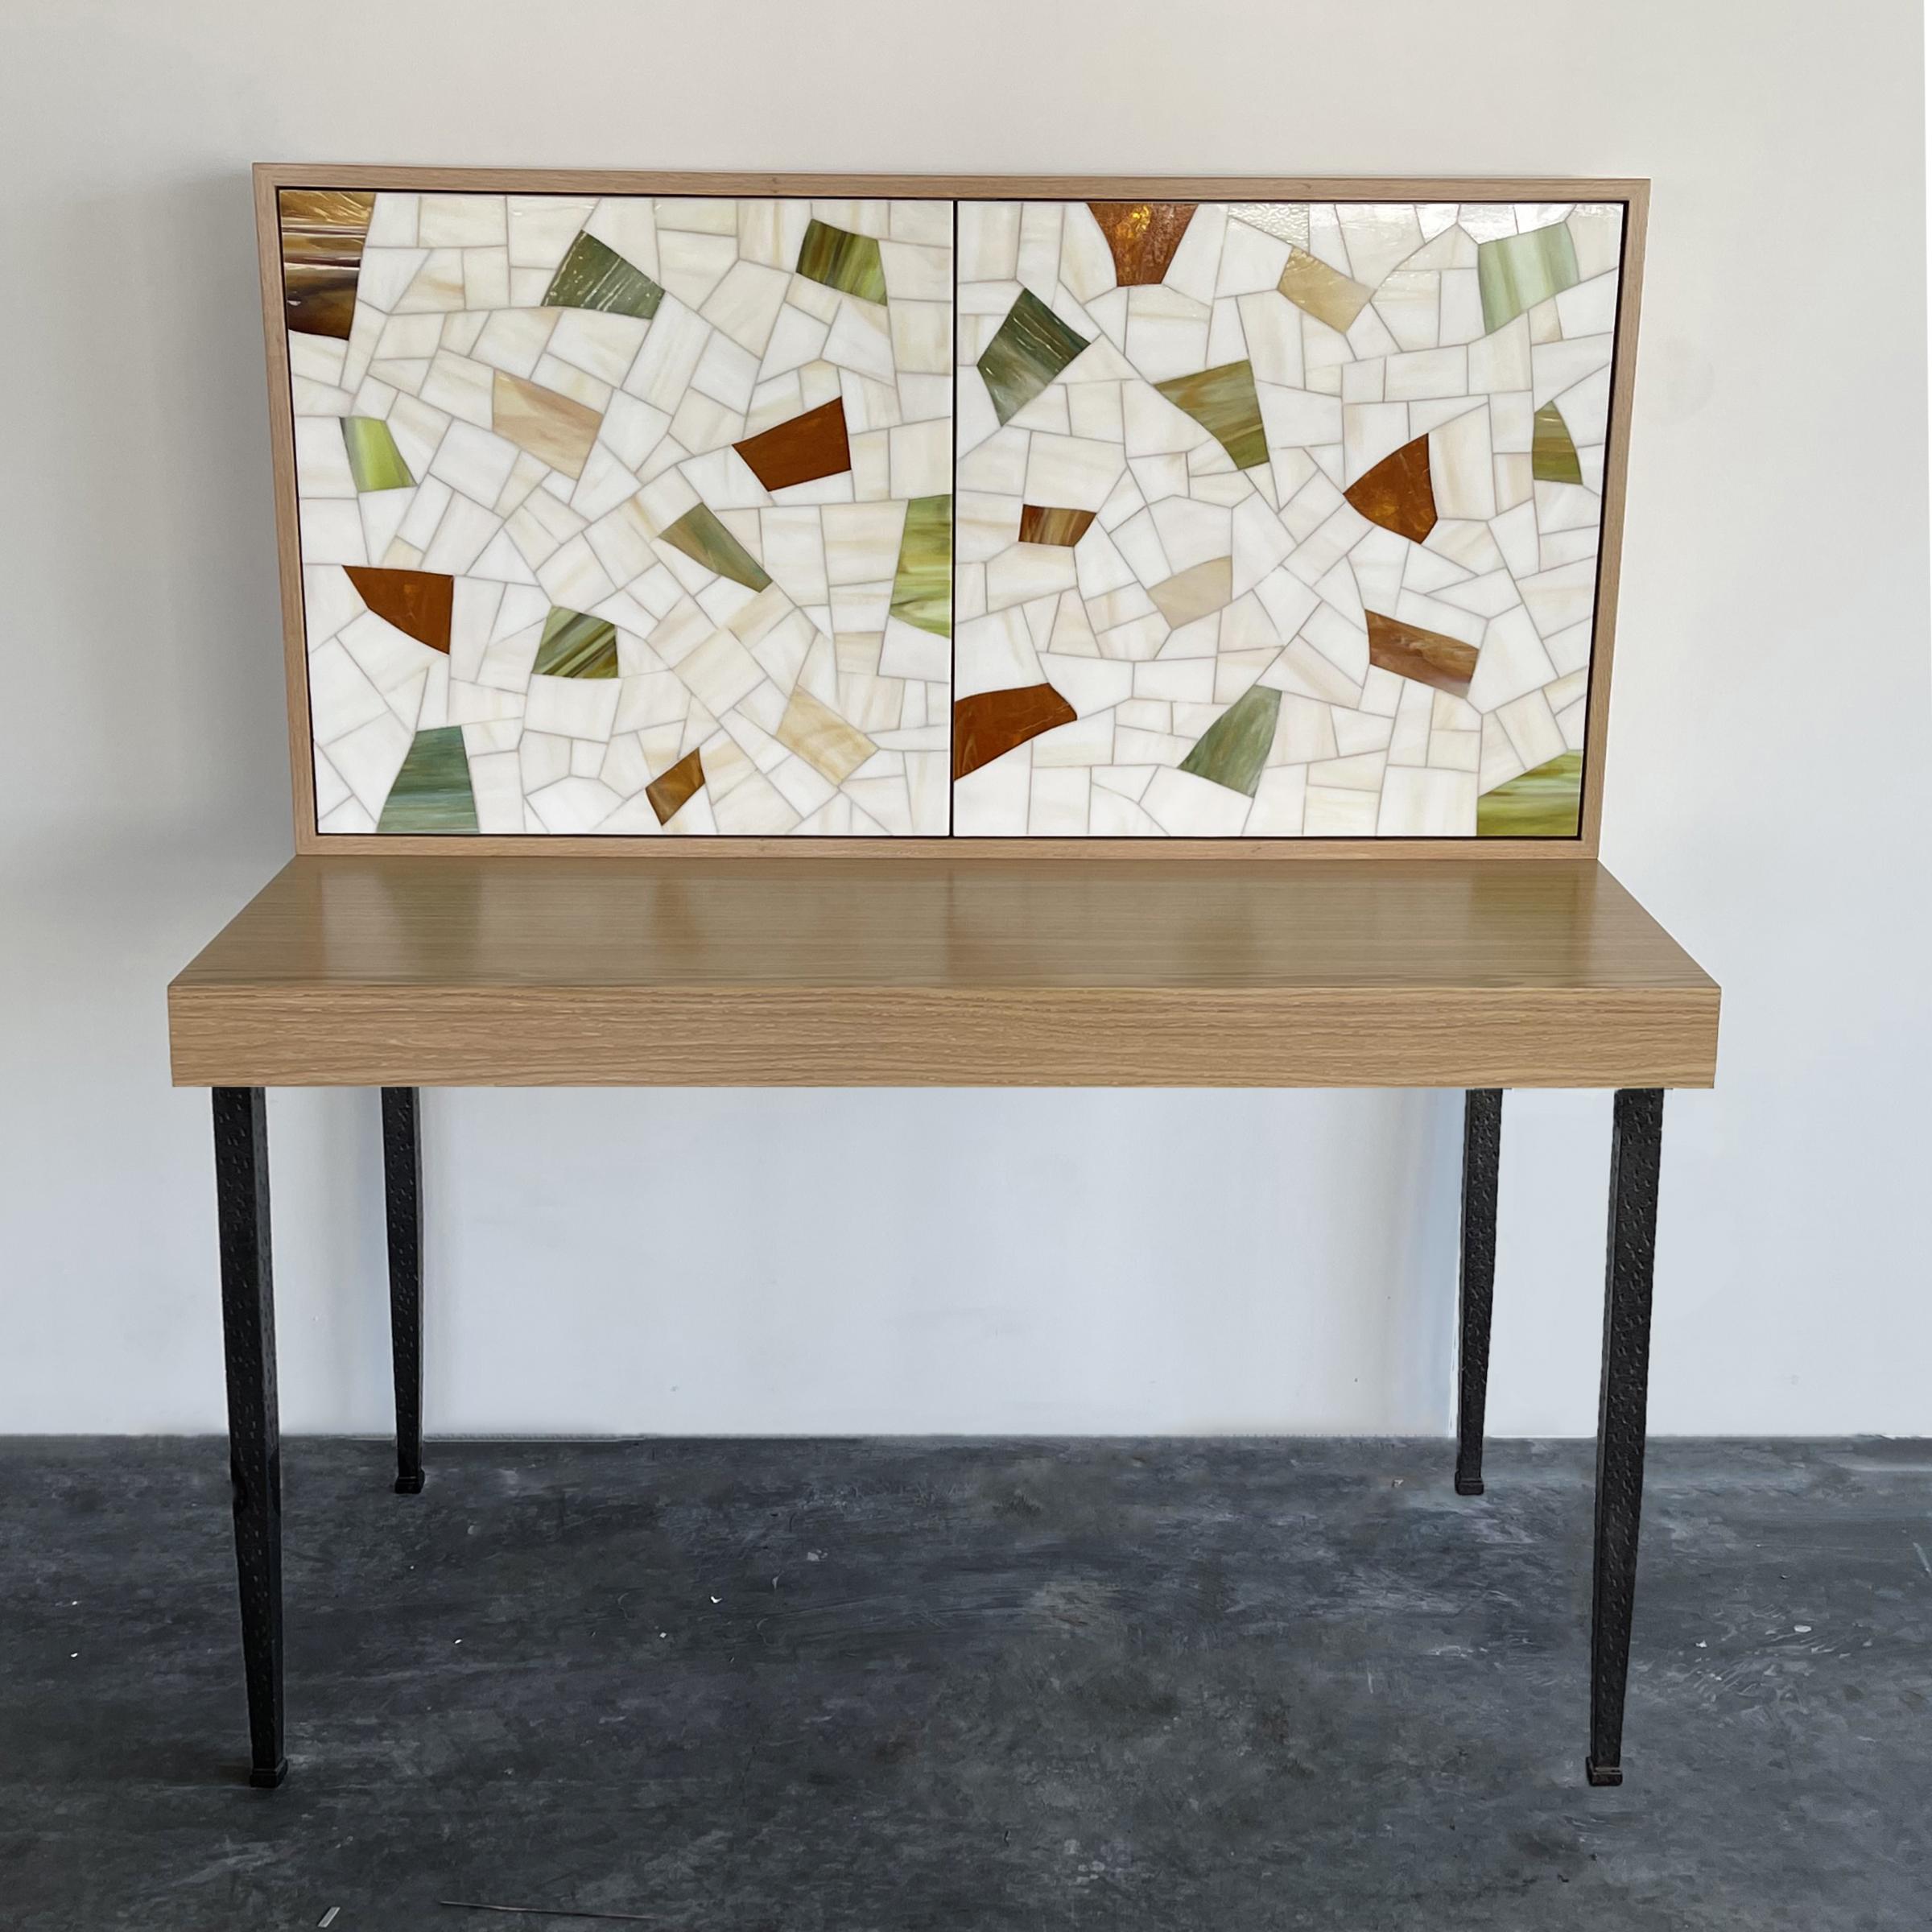 The terrazzo desk by Ercole Home is a stationary desk with a 2 door touch latch storage cabinet above.
The doors are covered in our iconic Terrazzo pattern finish with an assortment of light ivories and terracotta glass
The wood finish on this